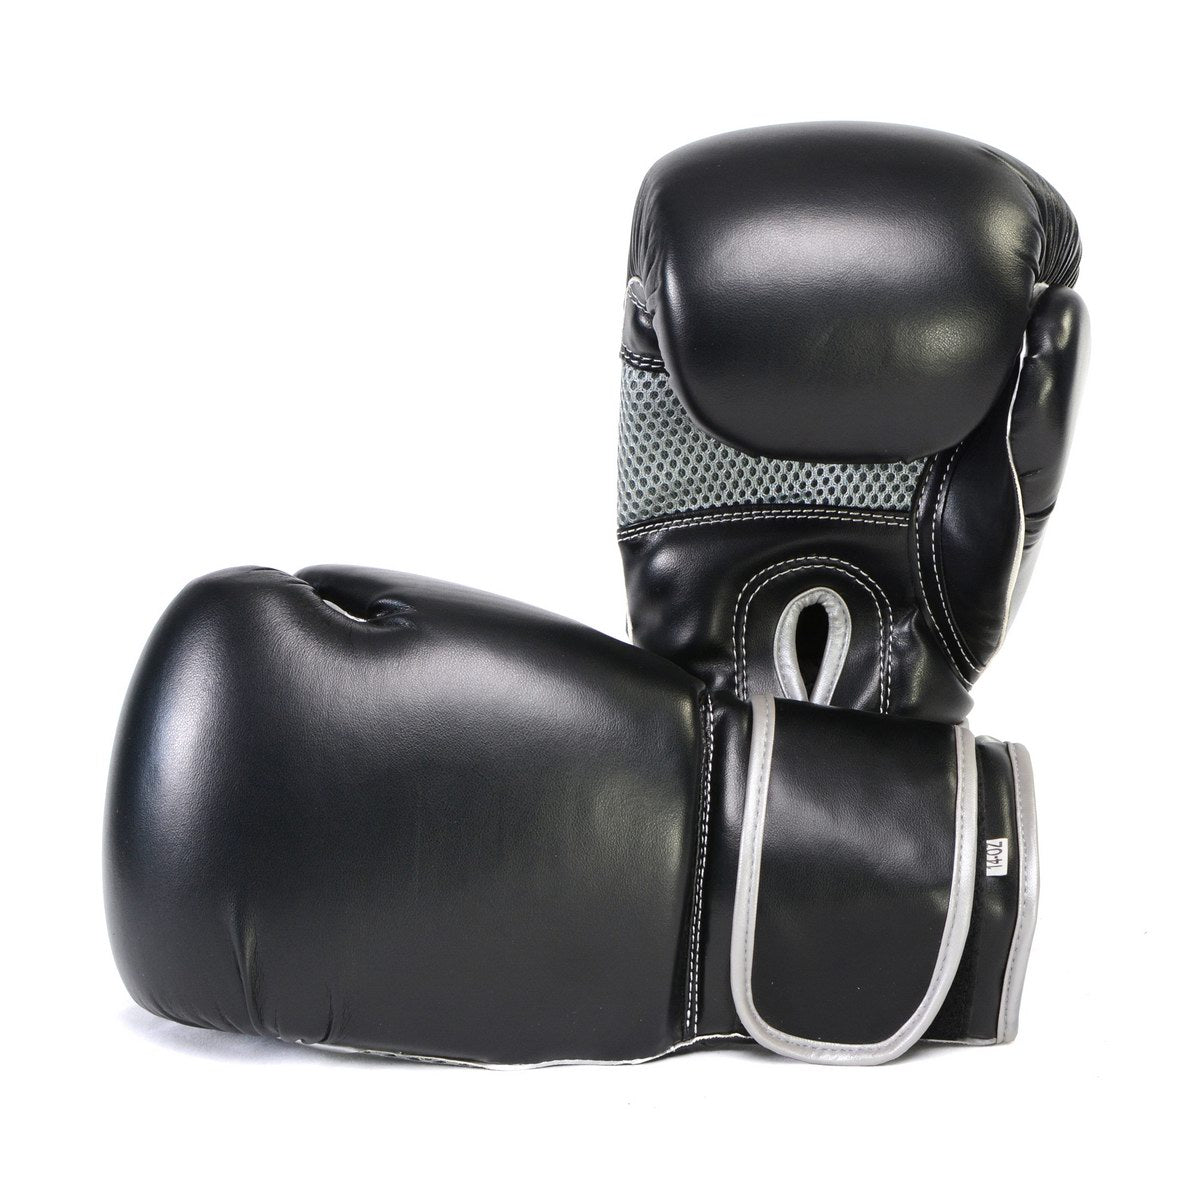 X-Fitness XF2000 Gel Boxing Kickboxing Punching Bag Gloves-BLK/SILVER